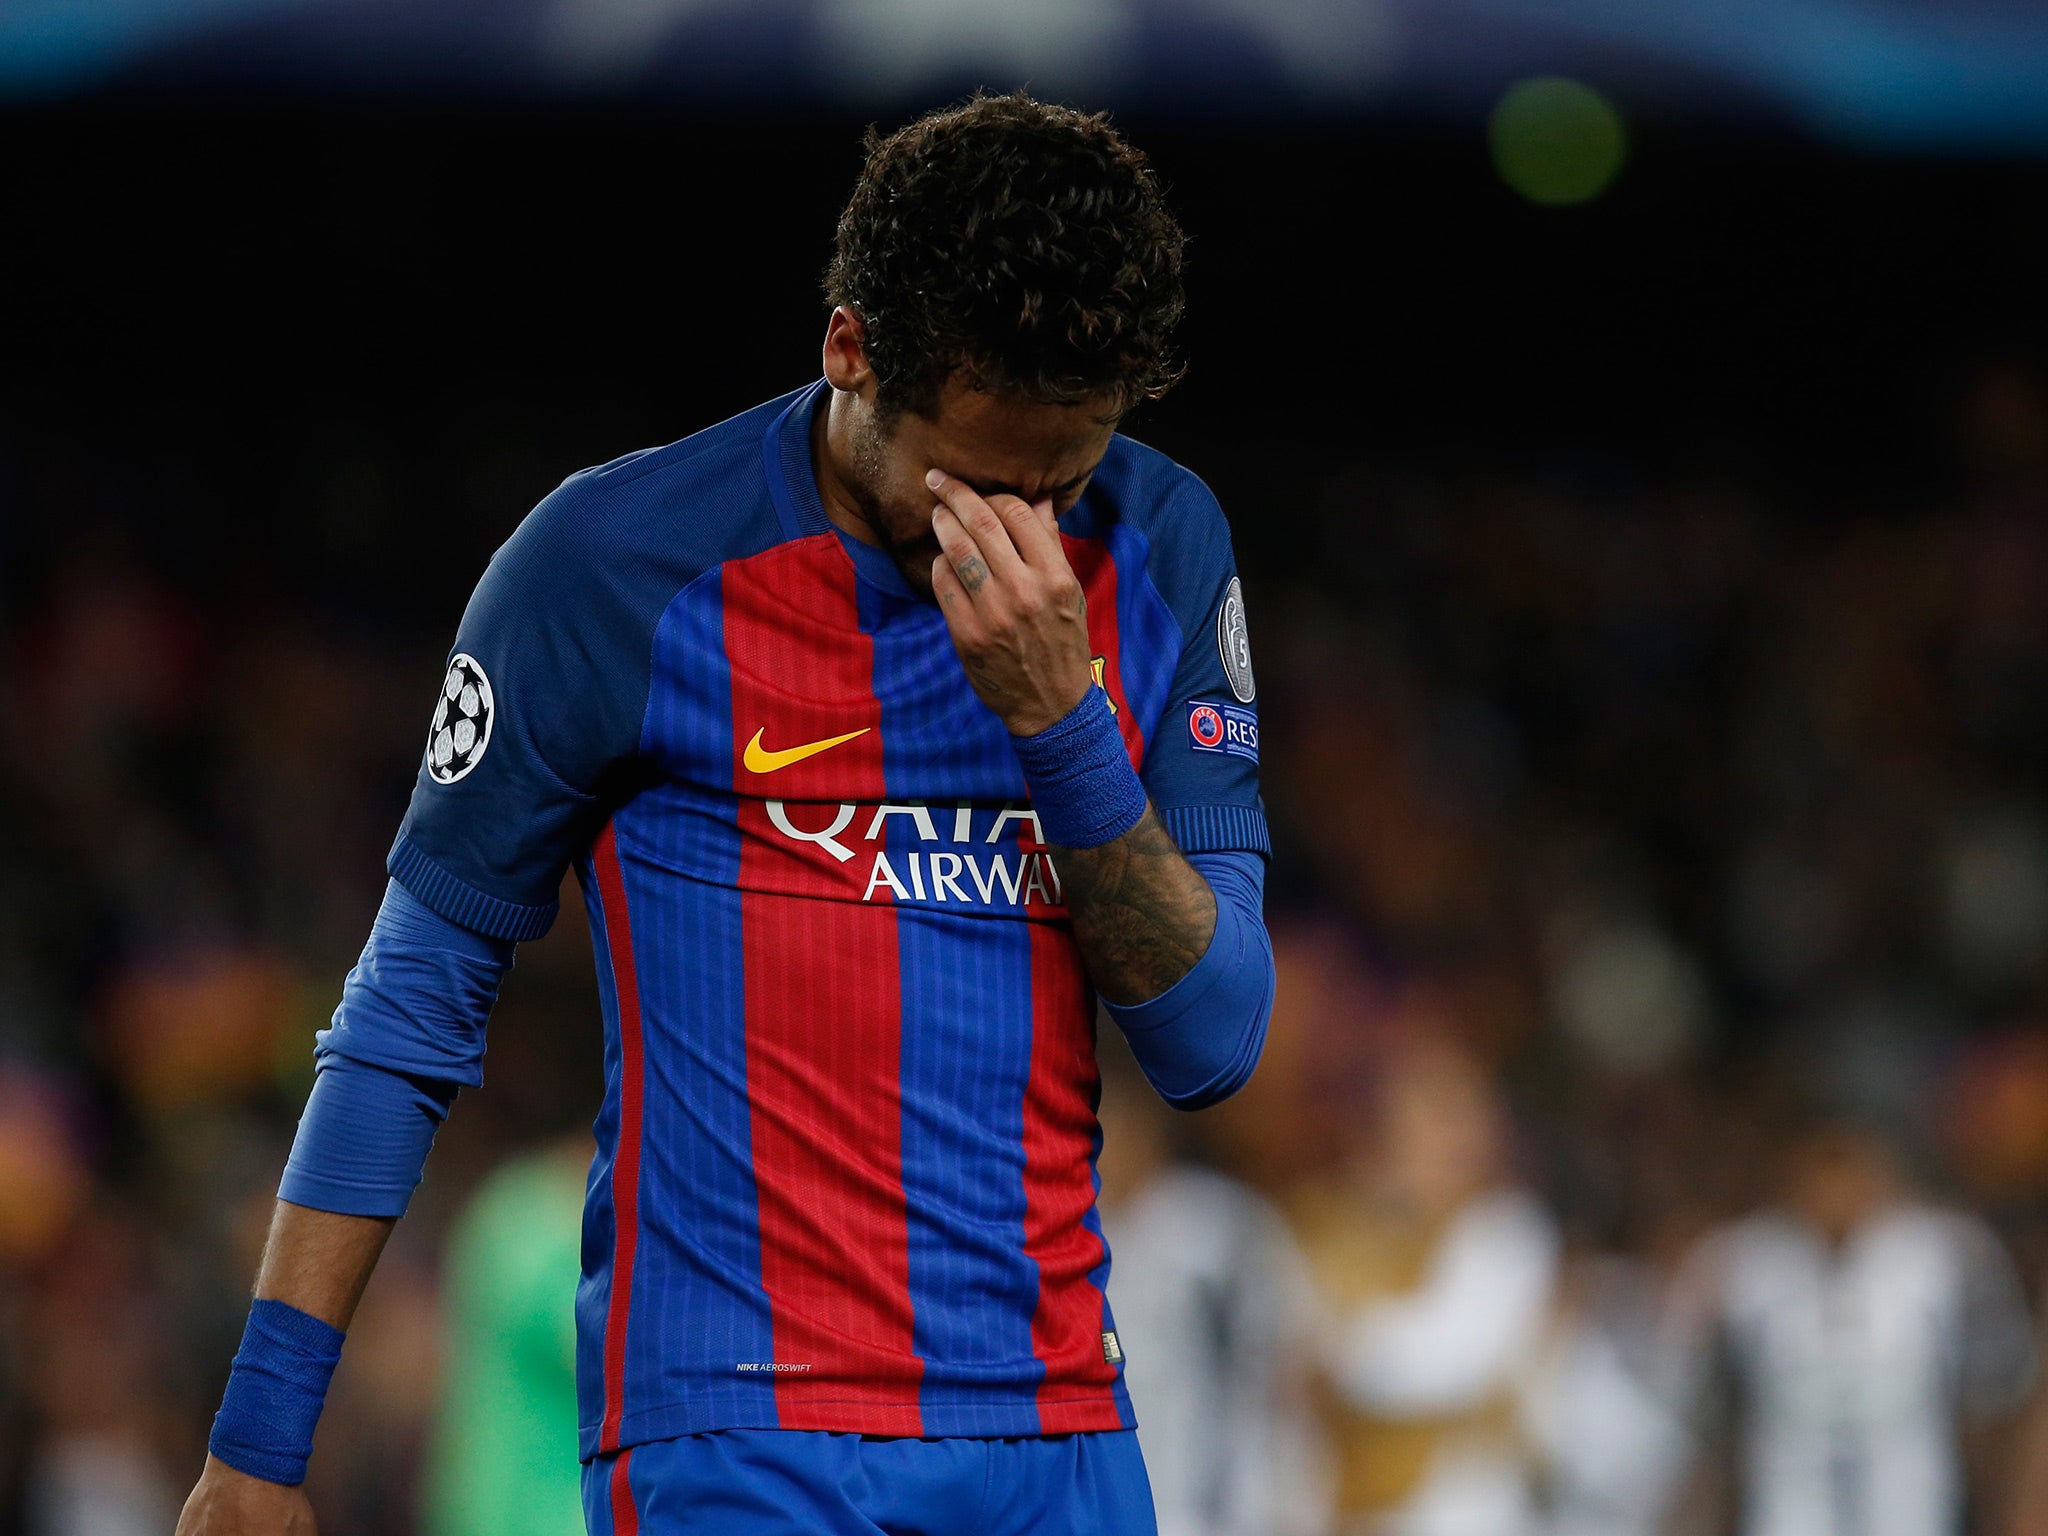 Neymar's ban was extended after he sarcastically applauded a fourth official